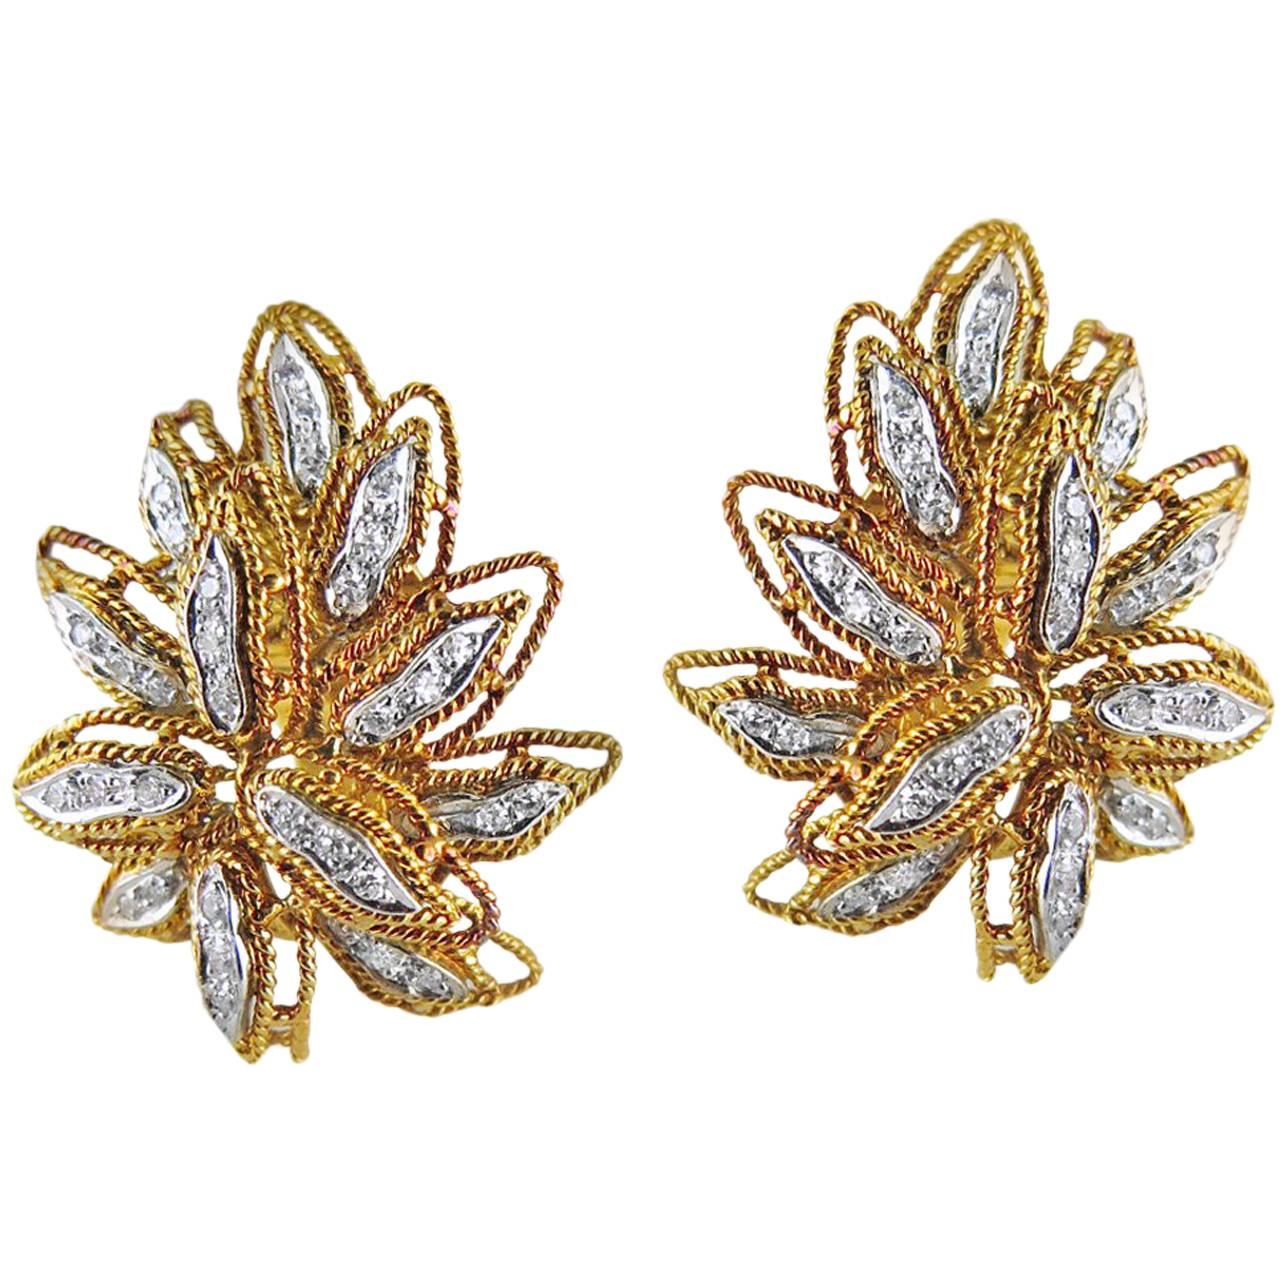 Pair of Diamond and 18 Carat Rose Gold Earclips by Vourakis